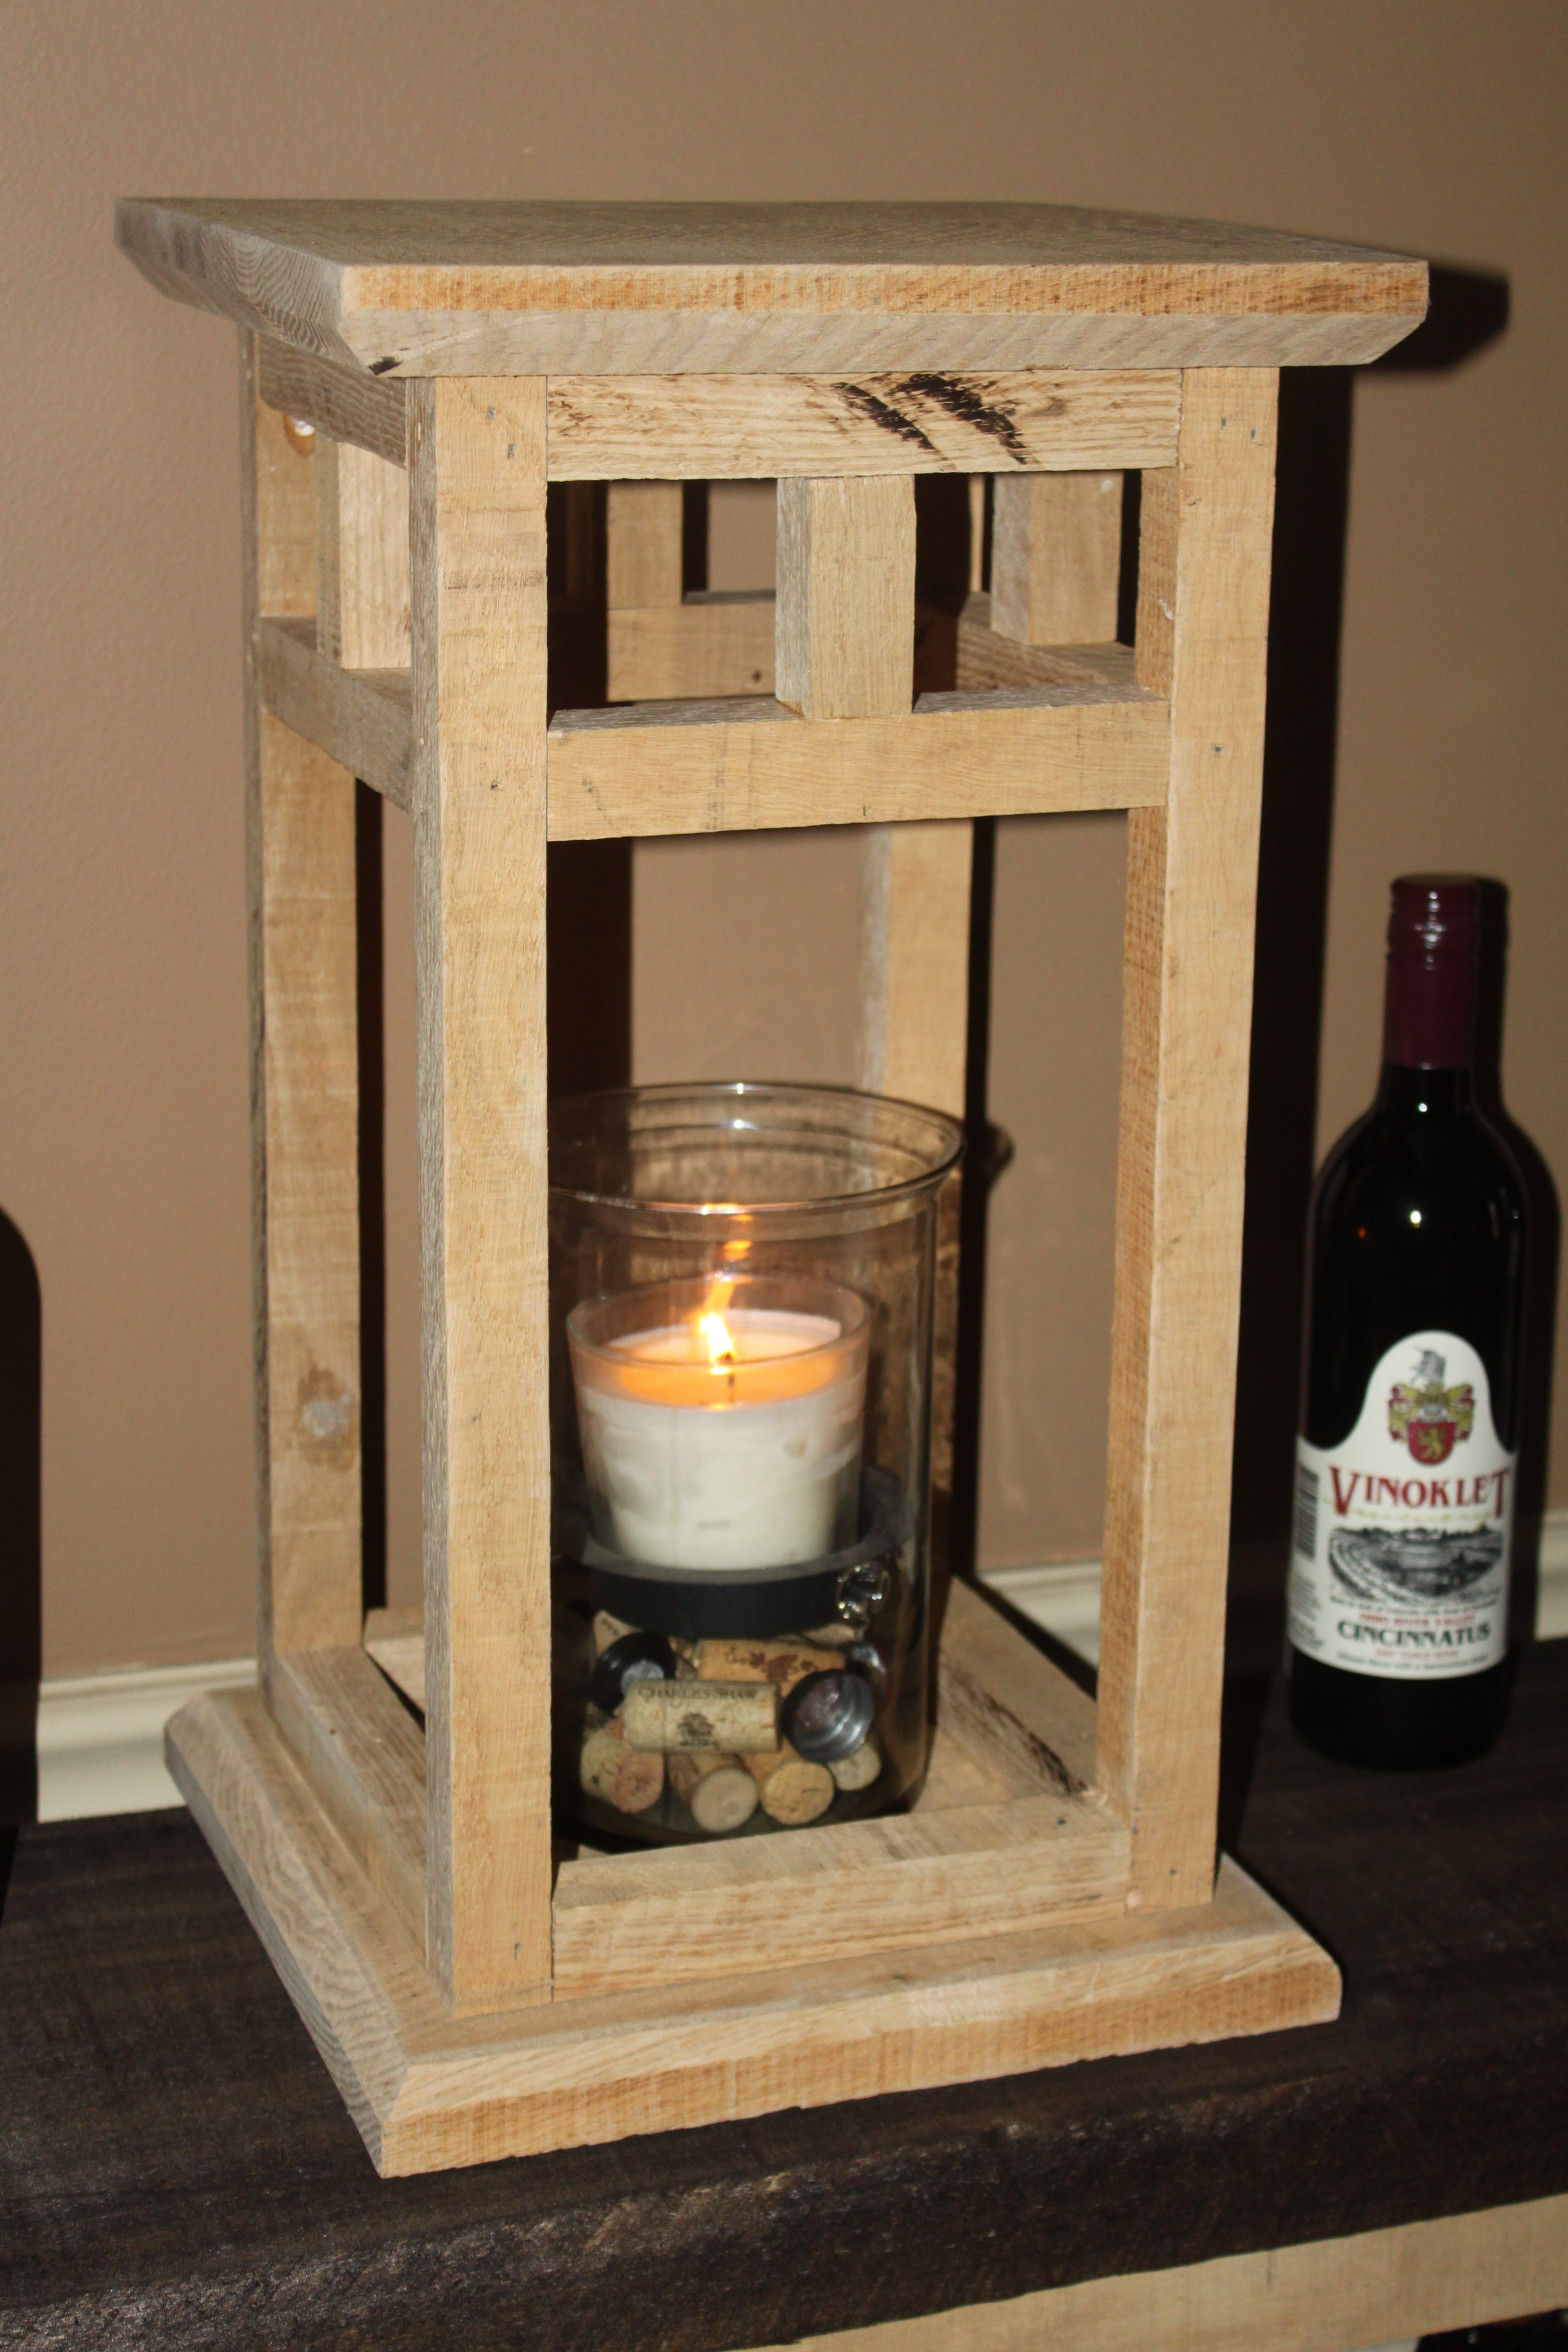 DIY Wooden Lanterns
 The DIY Rustic Wood Lantern Project Made From Pallets